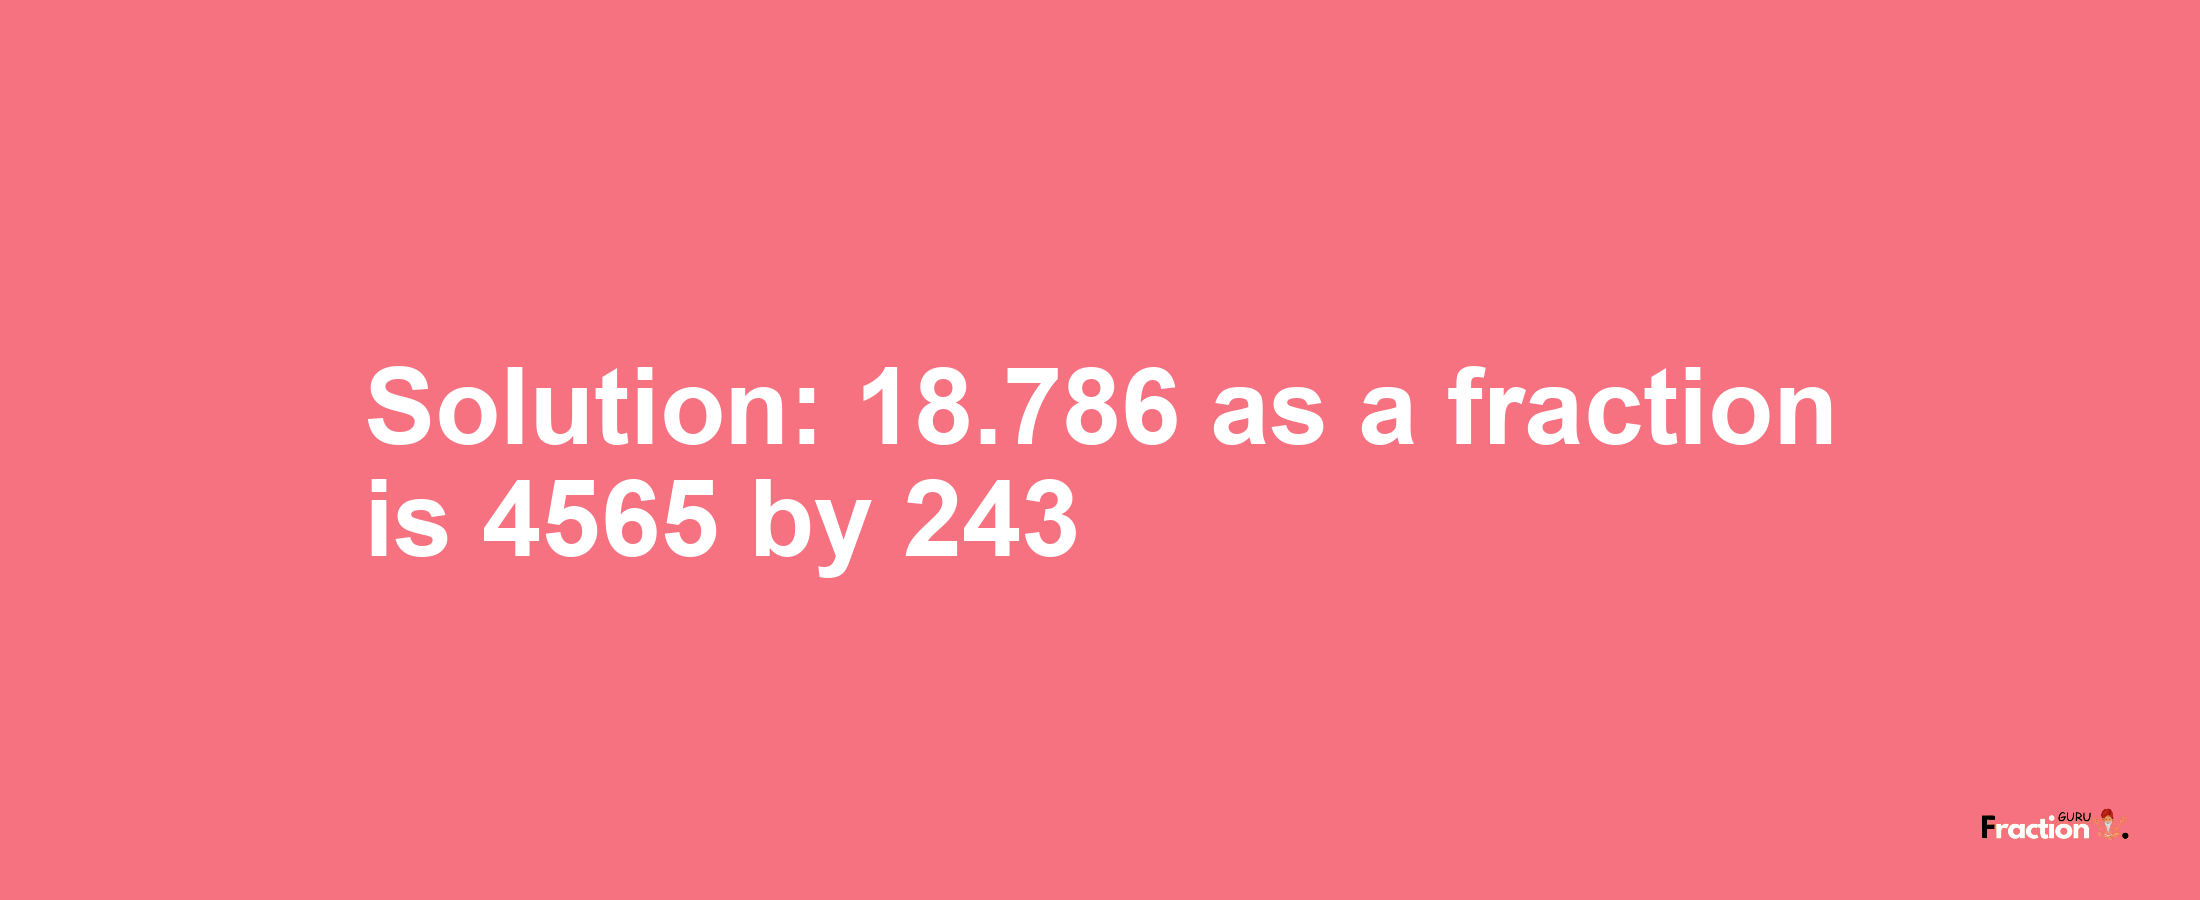 Solution:18.786 as a fraction is 4565/243